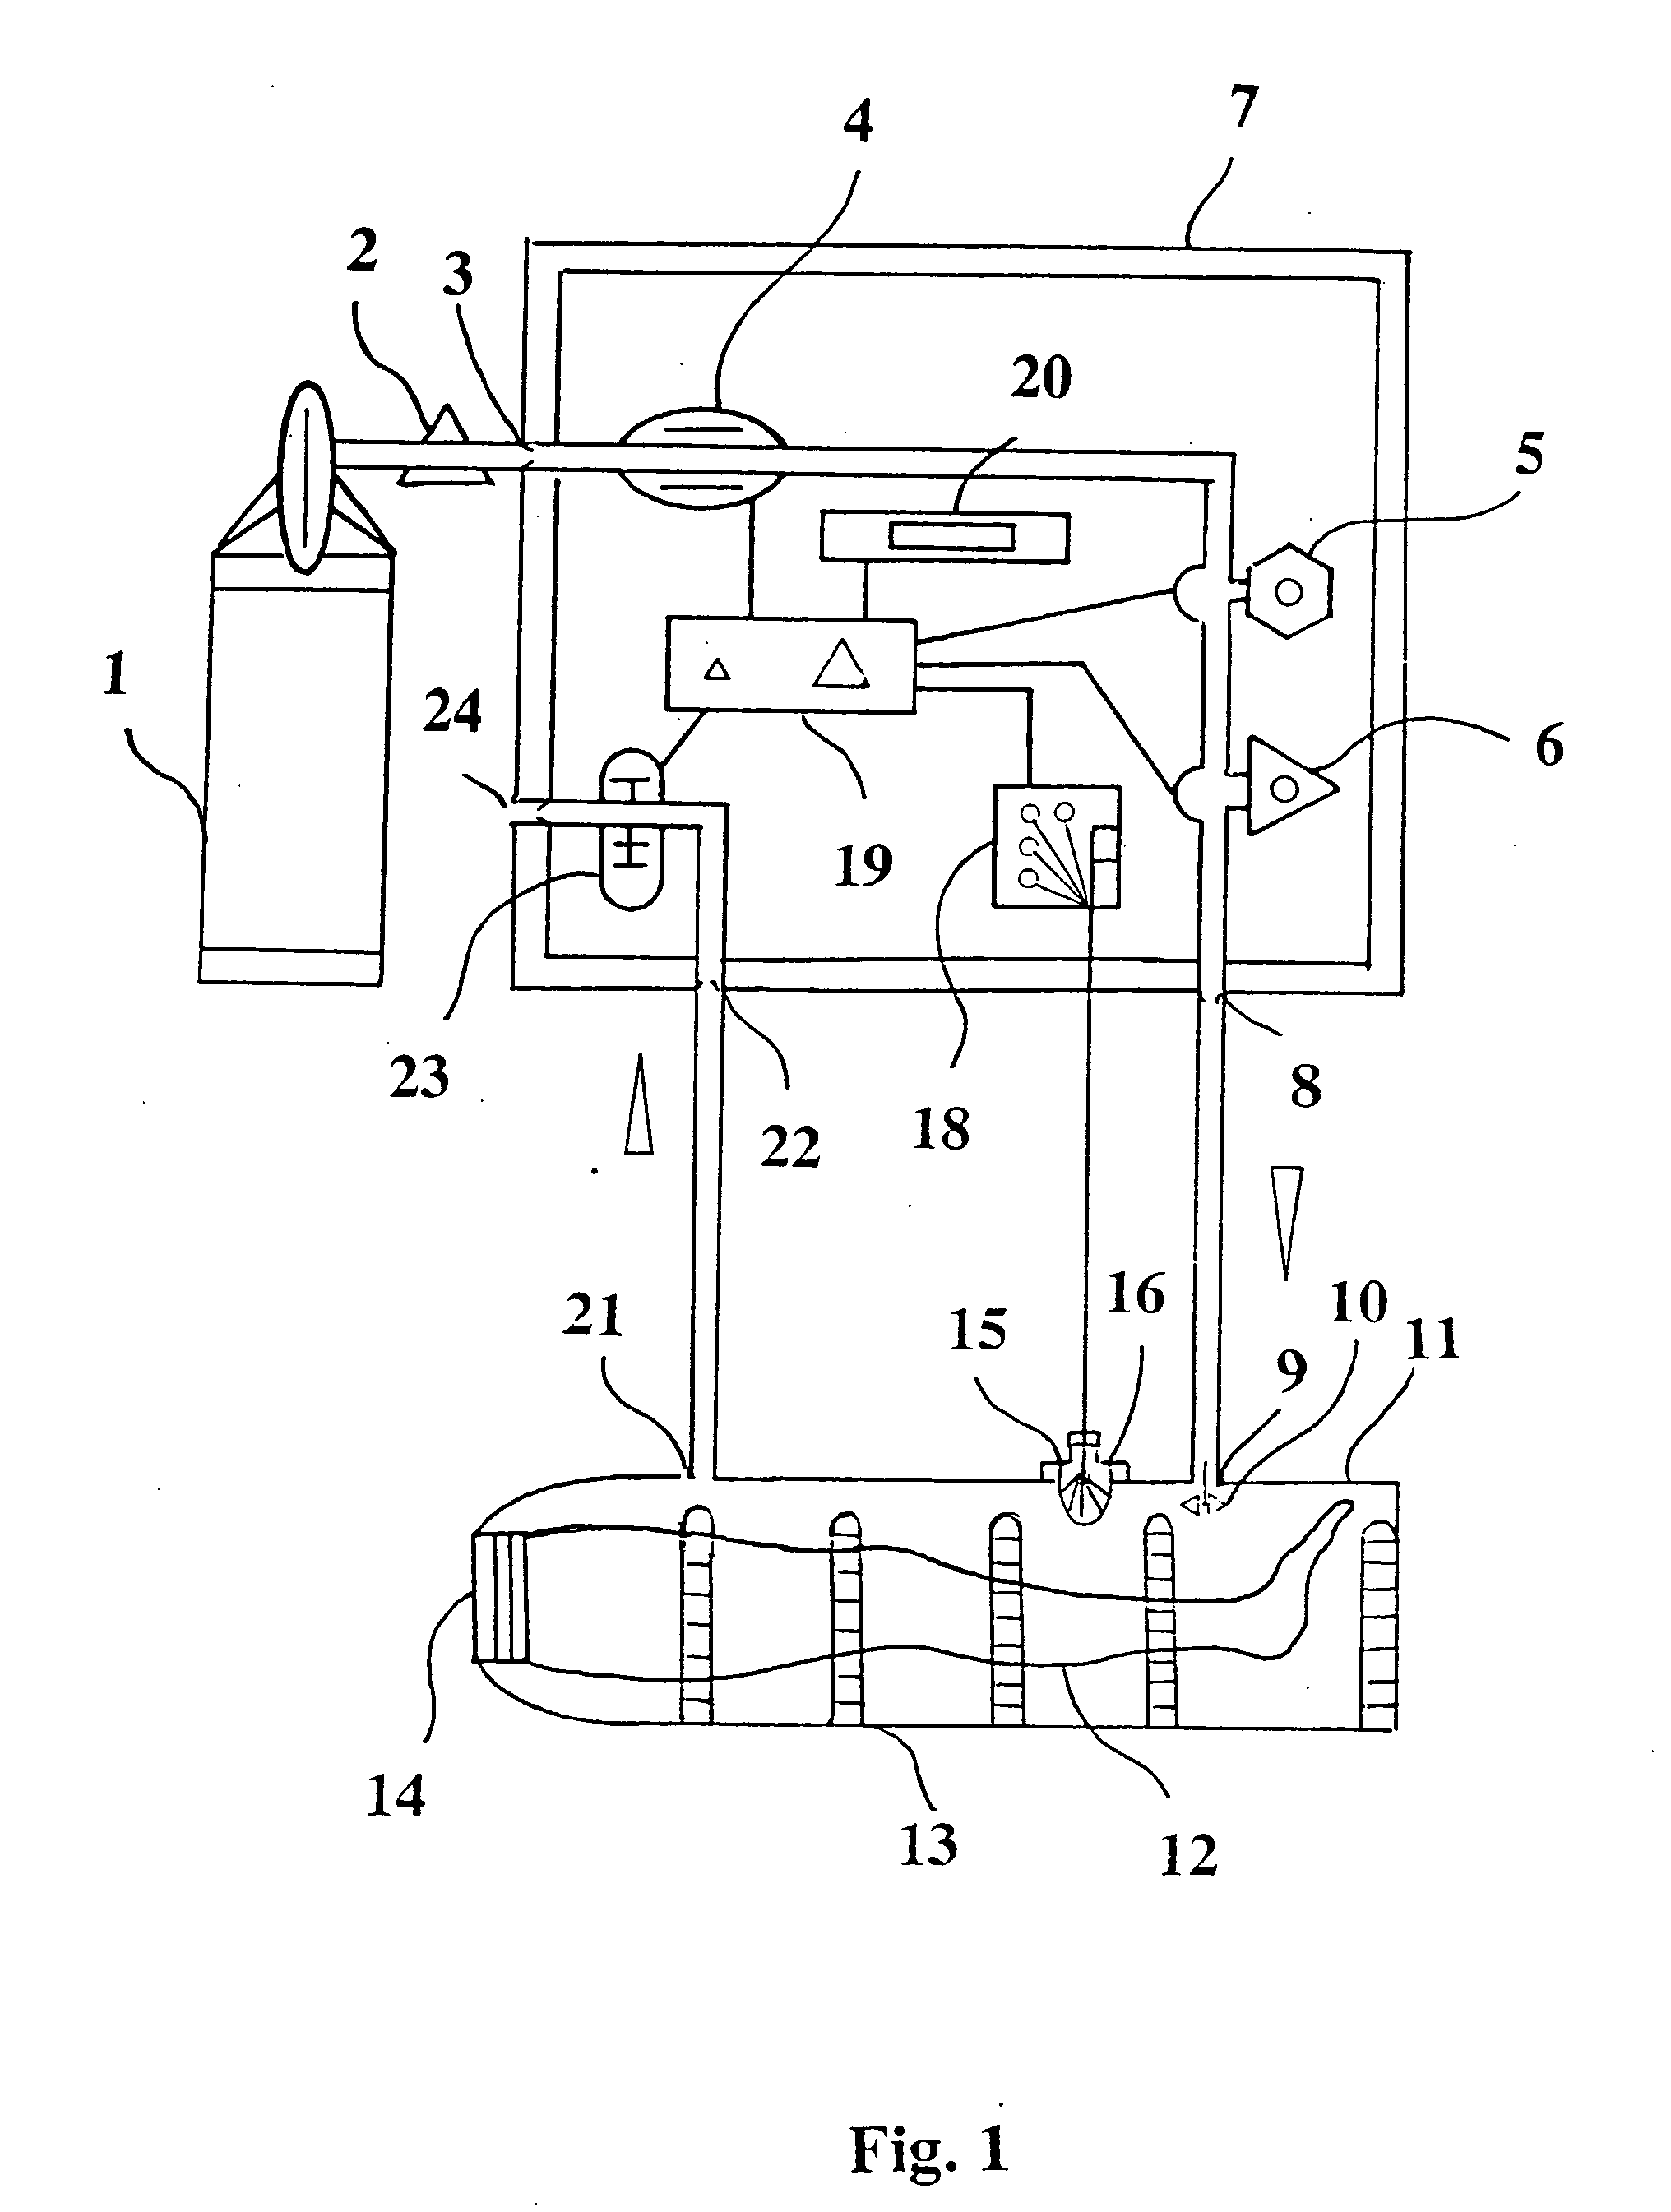 Apparatus and method for precise ozone/oxygen delivery applied to the treatment of dermatological conditions, including gas gangrene, and related disorders